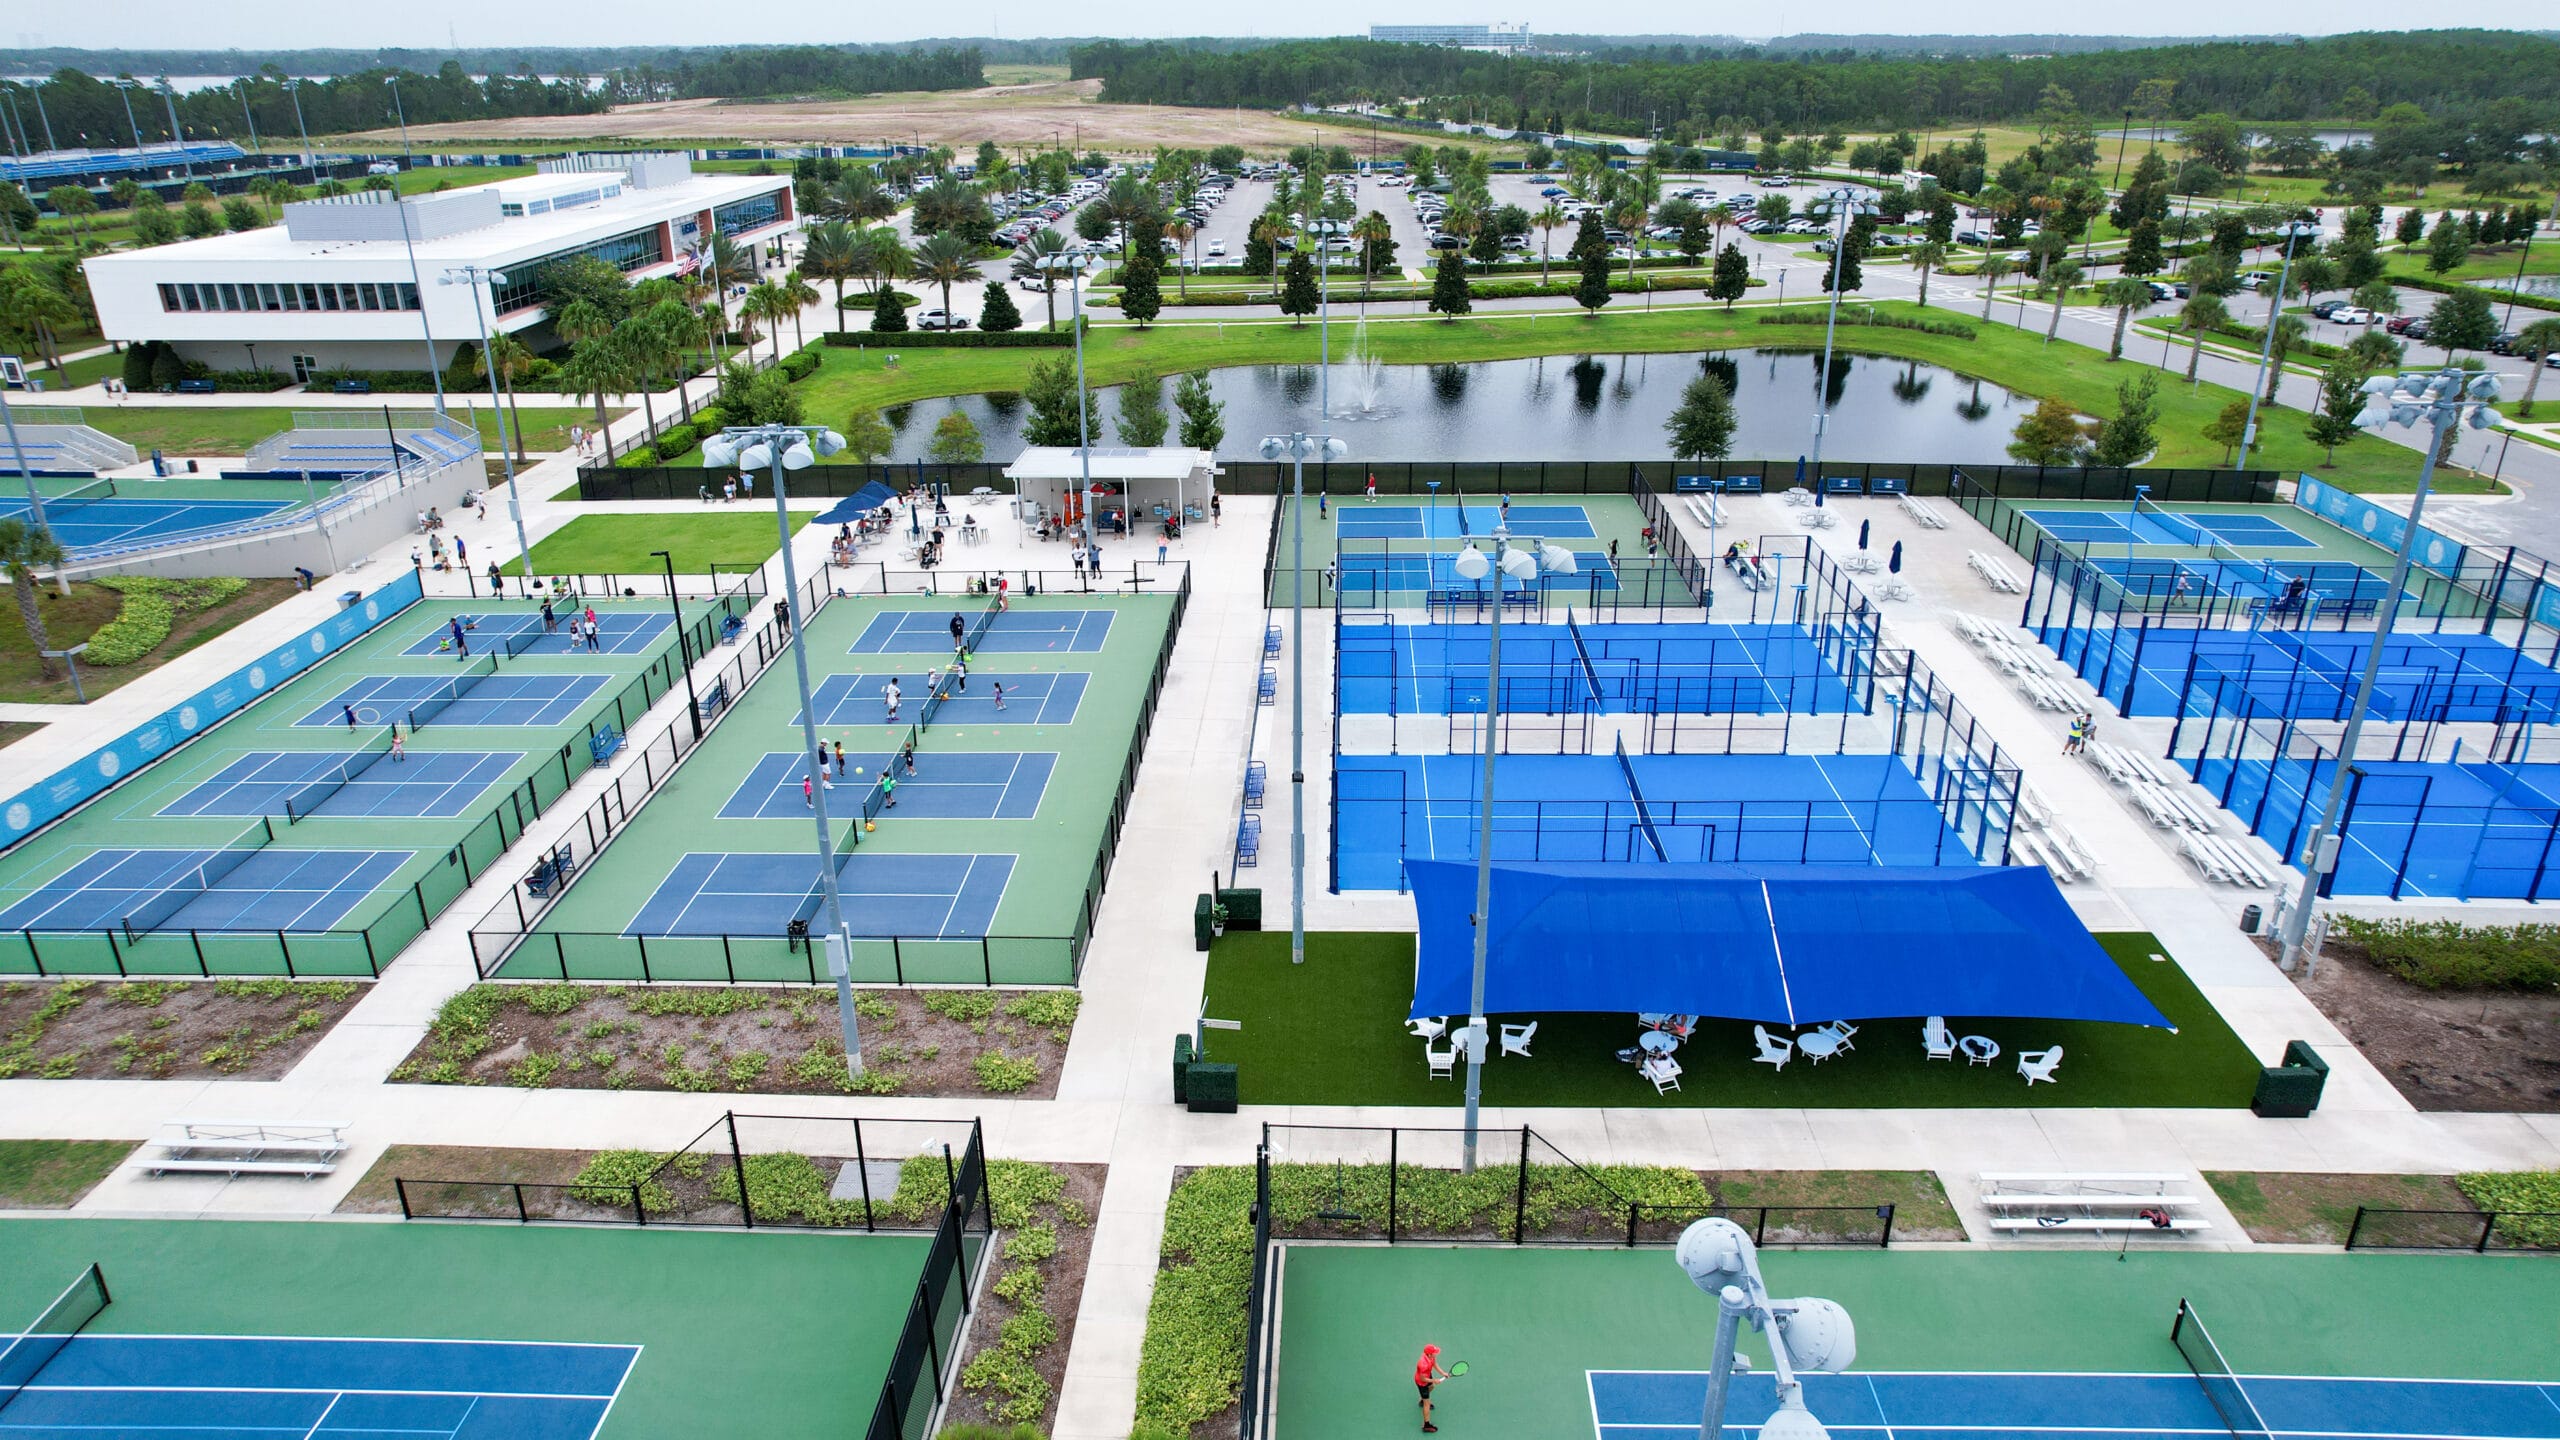 PICKLEBALL WILL MAKE OFFICIAL DEBUT ON TENNIS CHANNEL, THANKS TO THE NETWORK’S NEW AGREEMENT WITH THE PPA TOUR